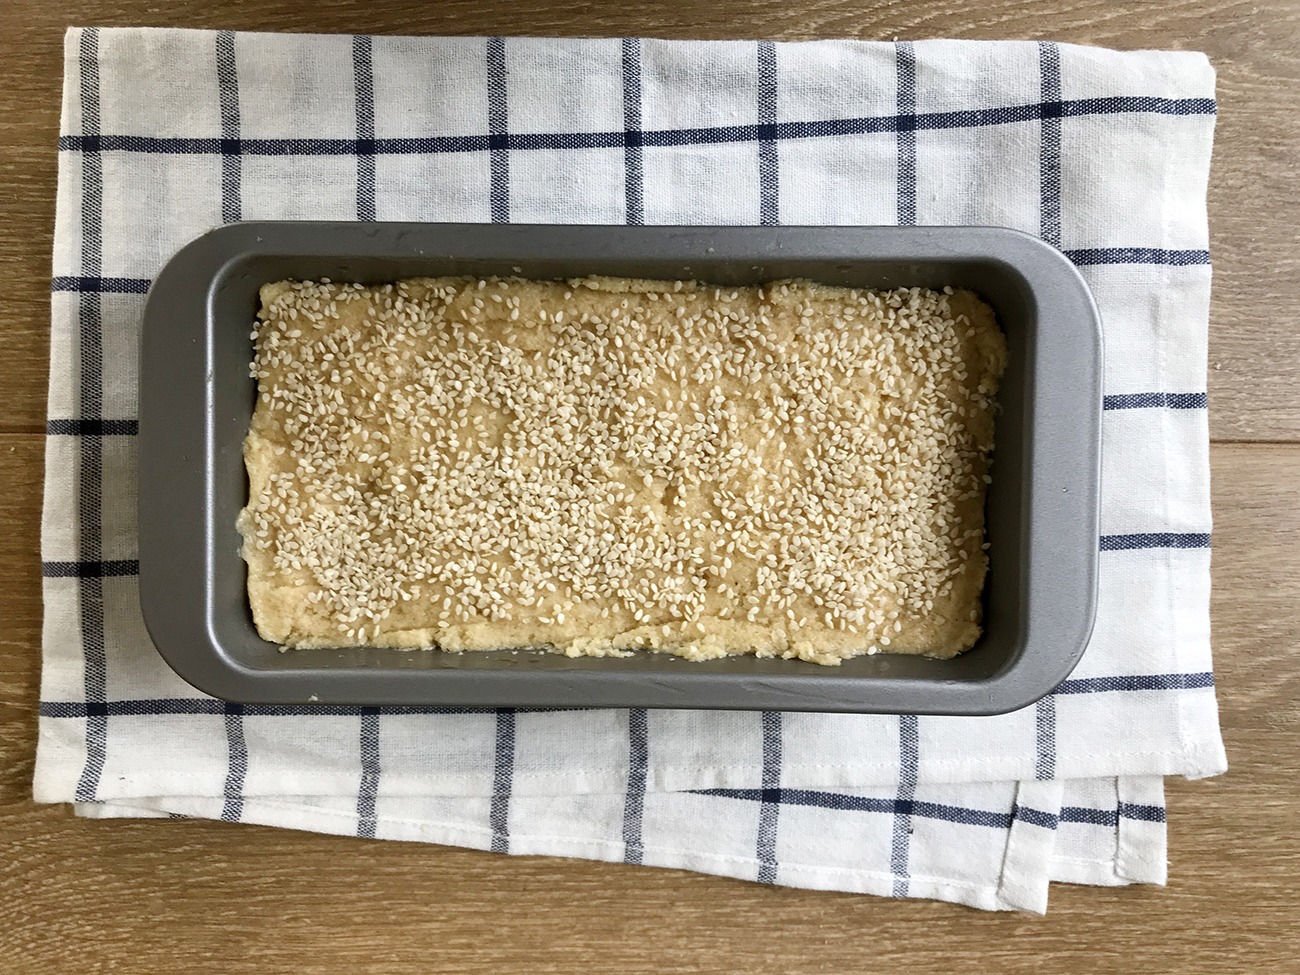 top the loaf with sesame seeds